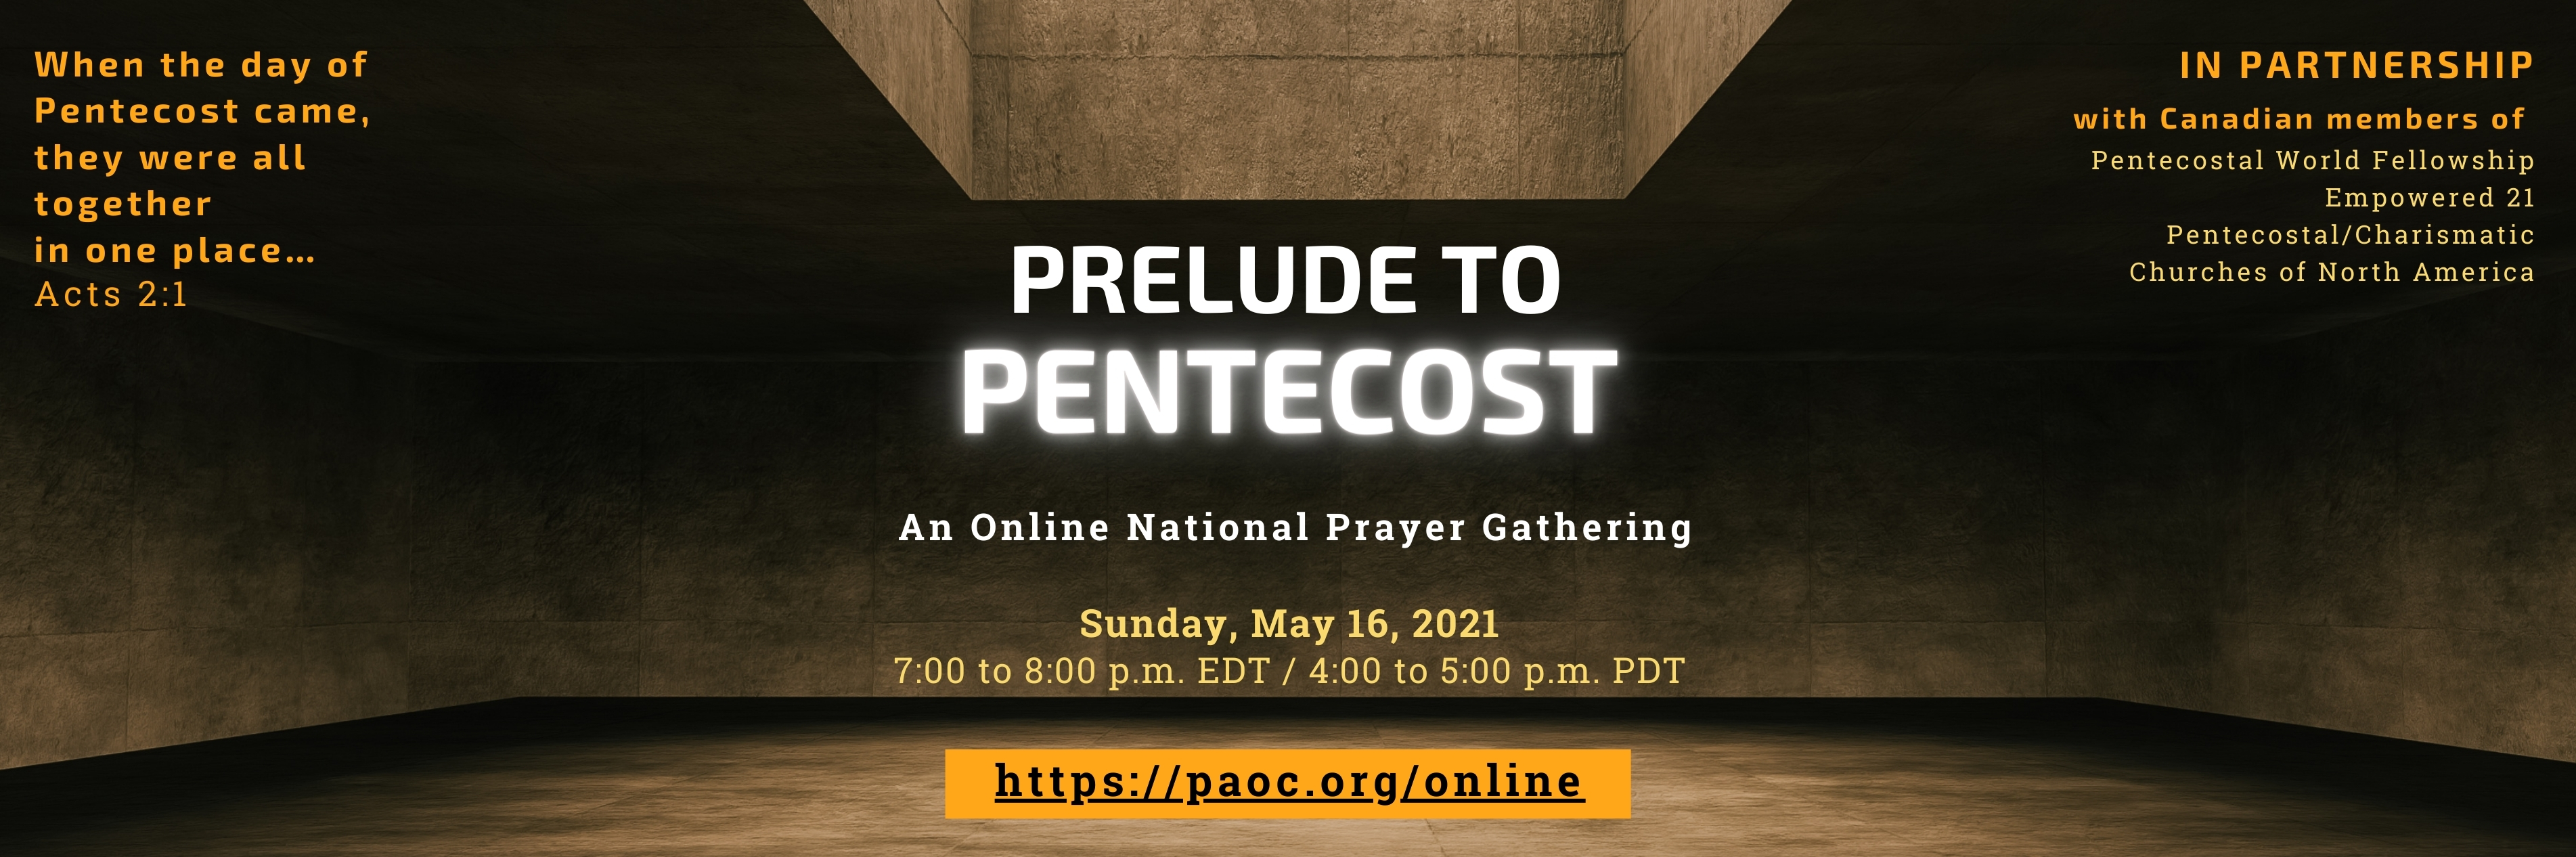 Prelude to Pentecost - Banner with date link verse partners - jpg